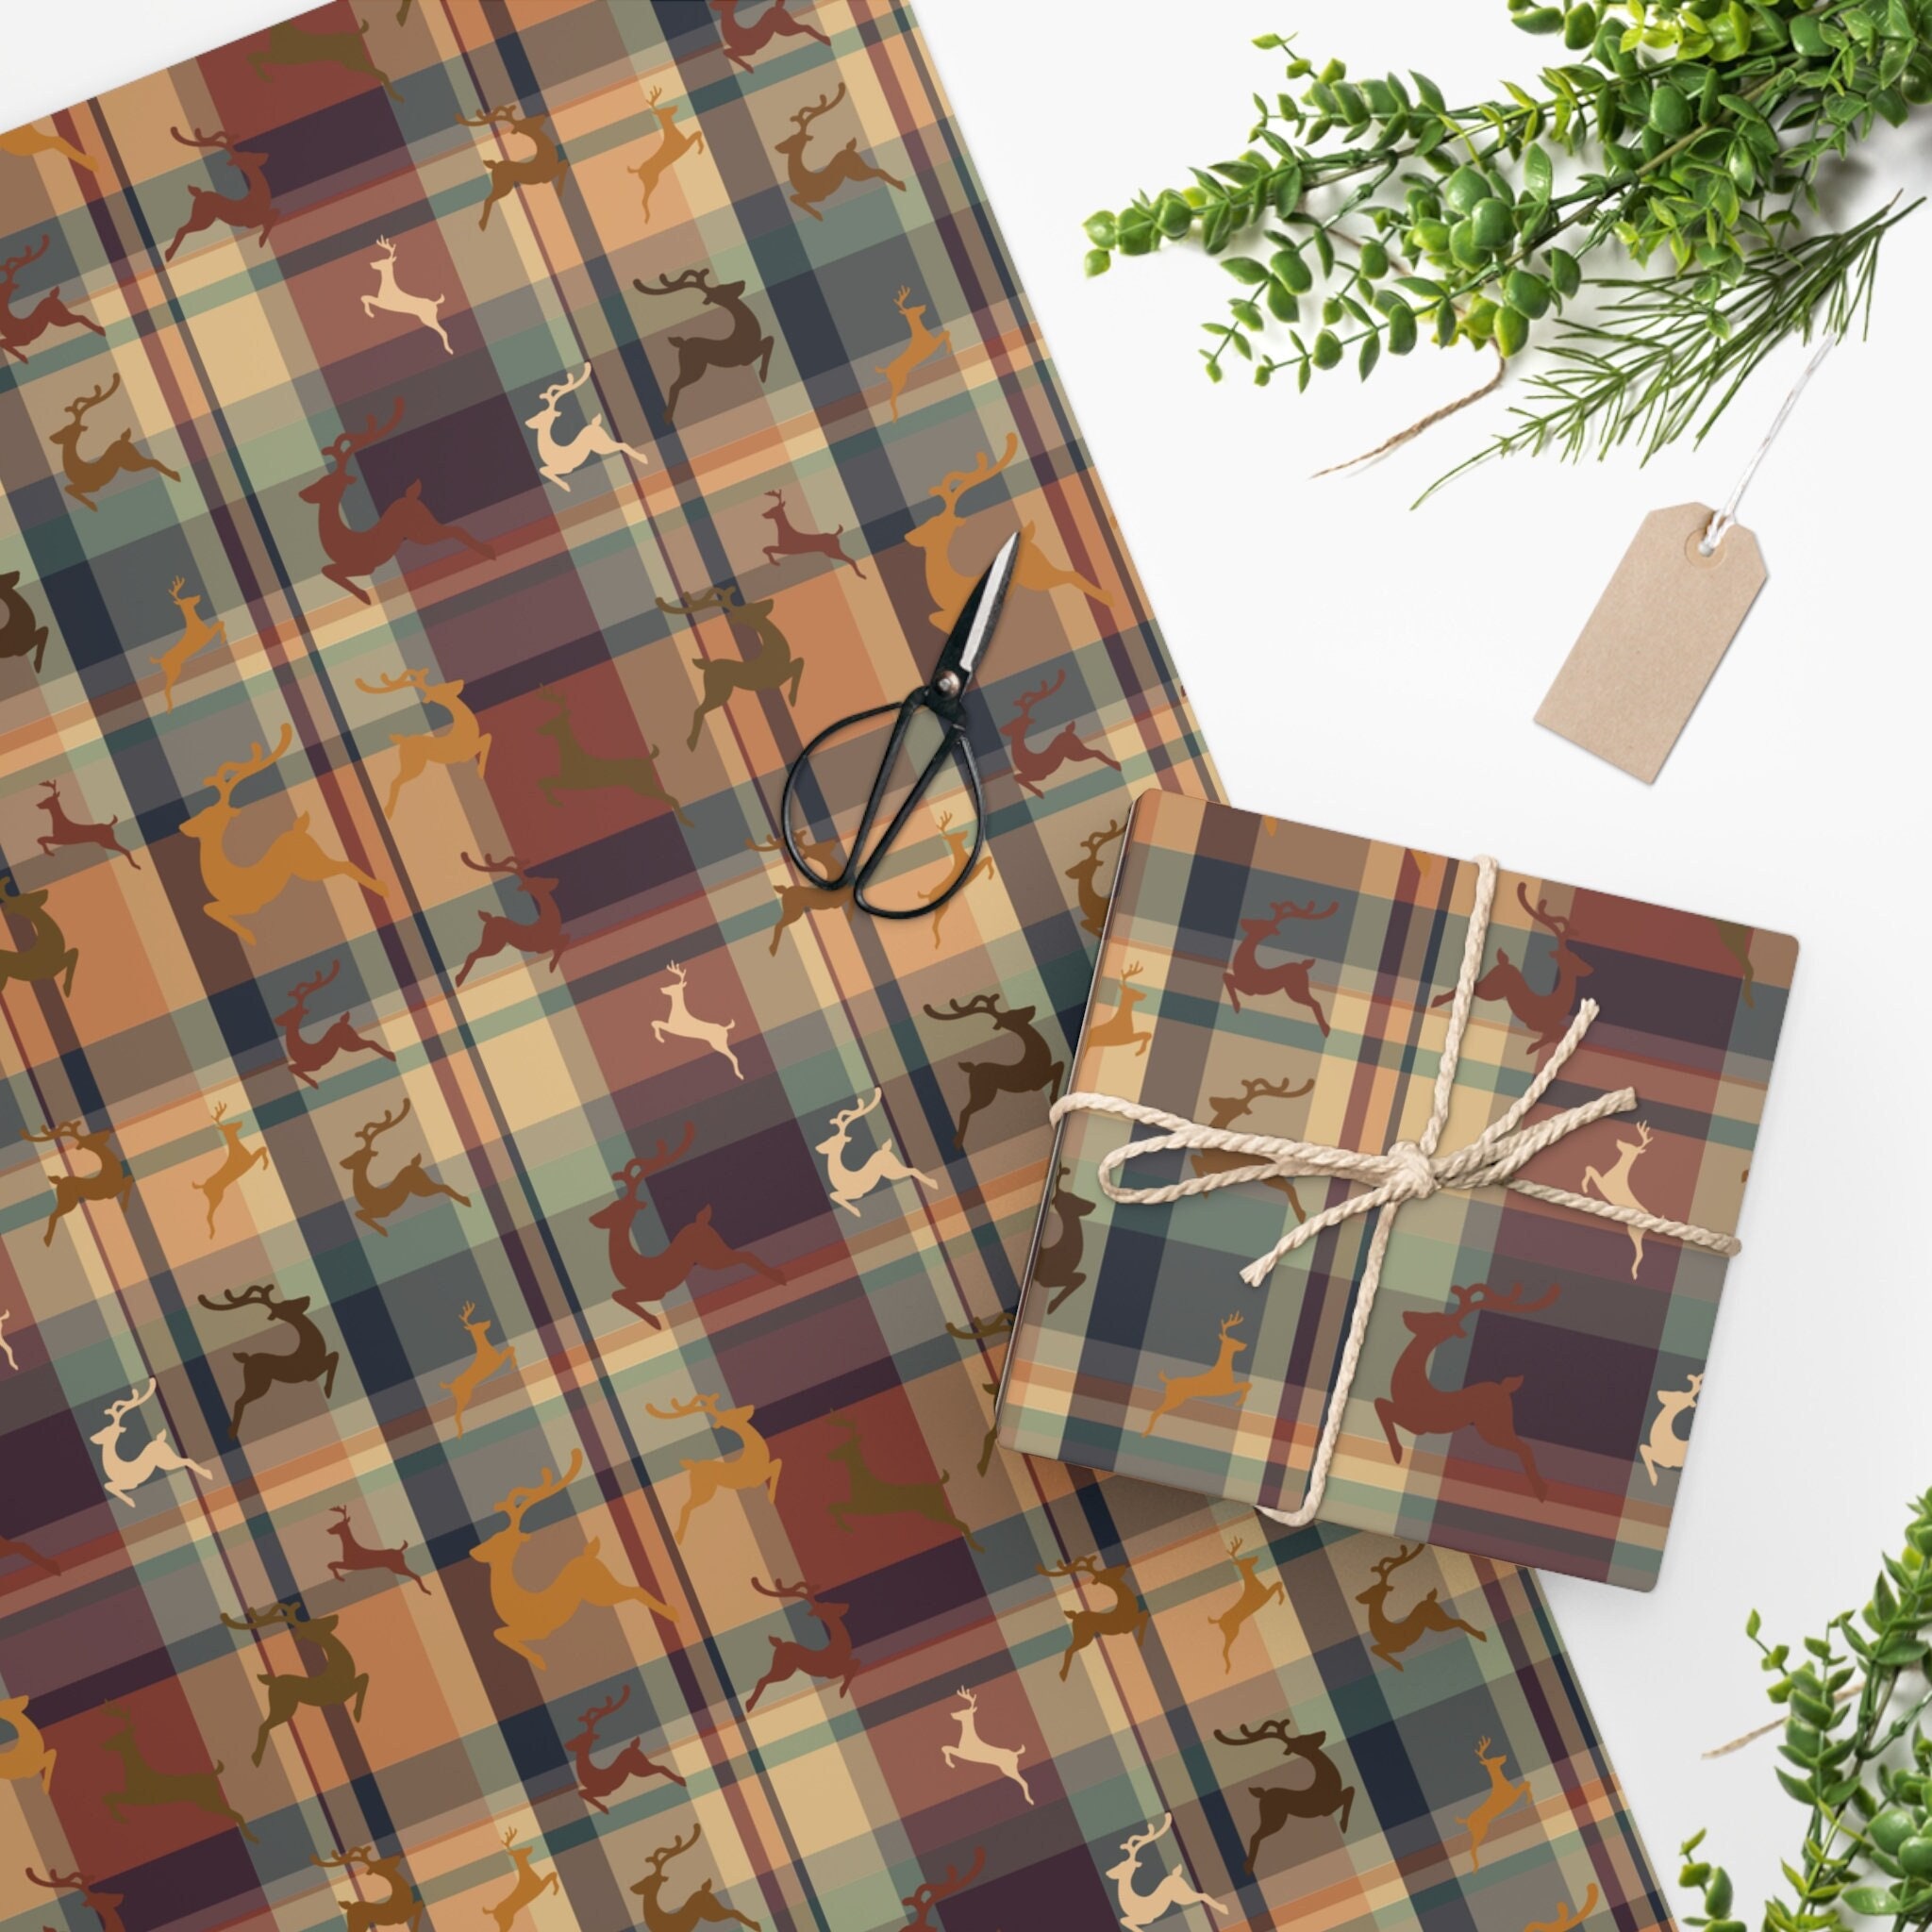 Celebrate Next Set of 4 (2 Rustic Christmas Plaid & 2 Natural Kraft) Holiday/Christmas Deluxe- Gift Wrap Wrapping Paper with Gift Tags